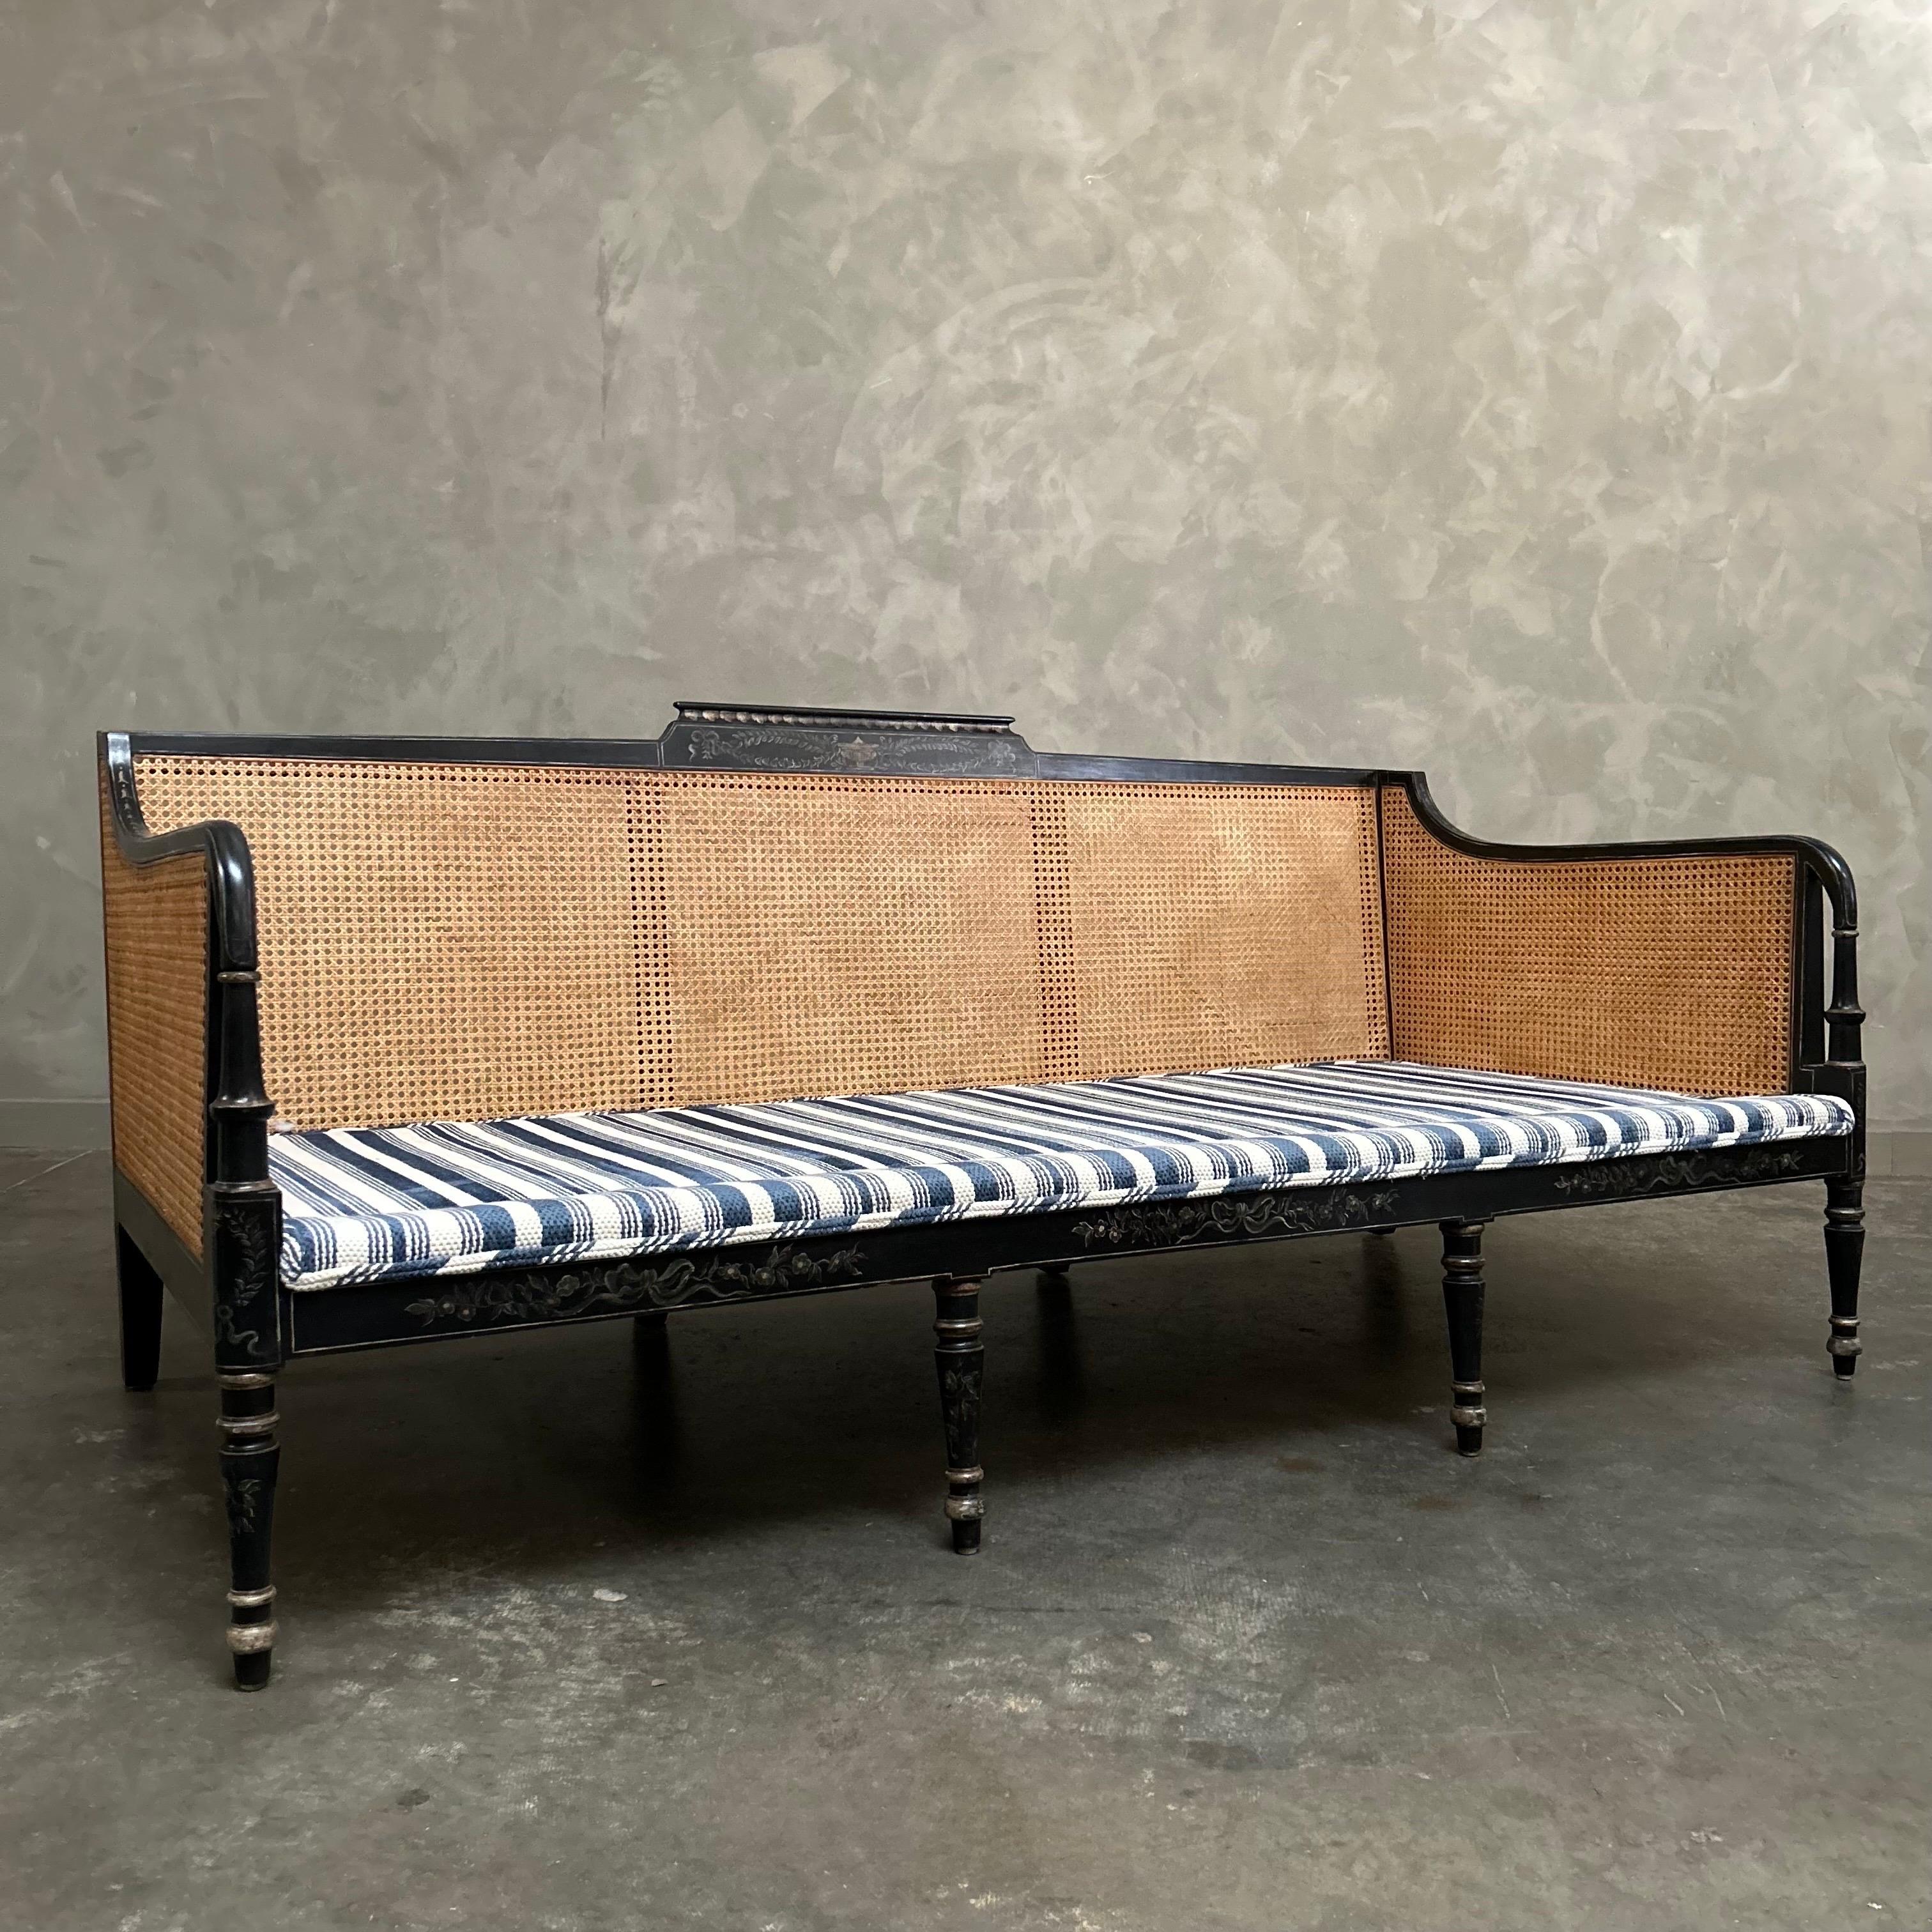 Antique Black Hand Painted Cane Daybed Sofa with Blue Ticking Upholstery For Sale 3